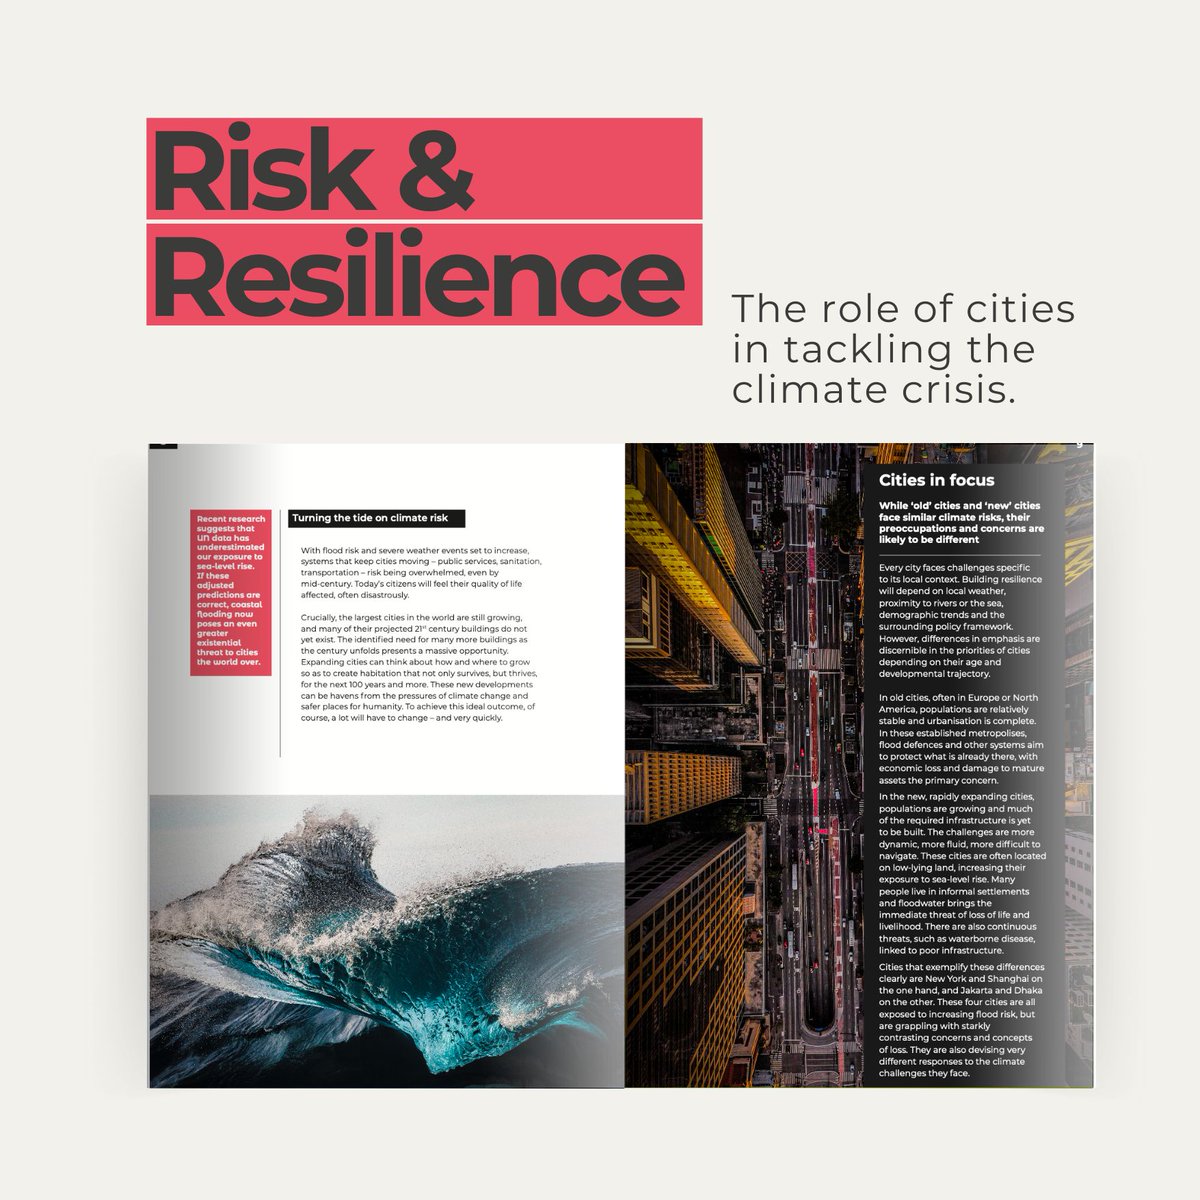 🌃 Read our report on the role cities can play in tackling the climate crisis here: static1.squarespace.com/static/60ccae6…